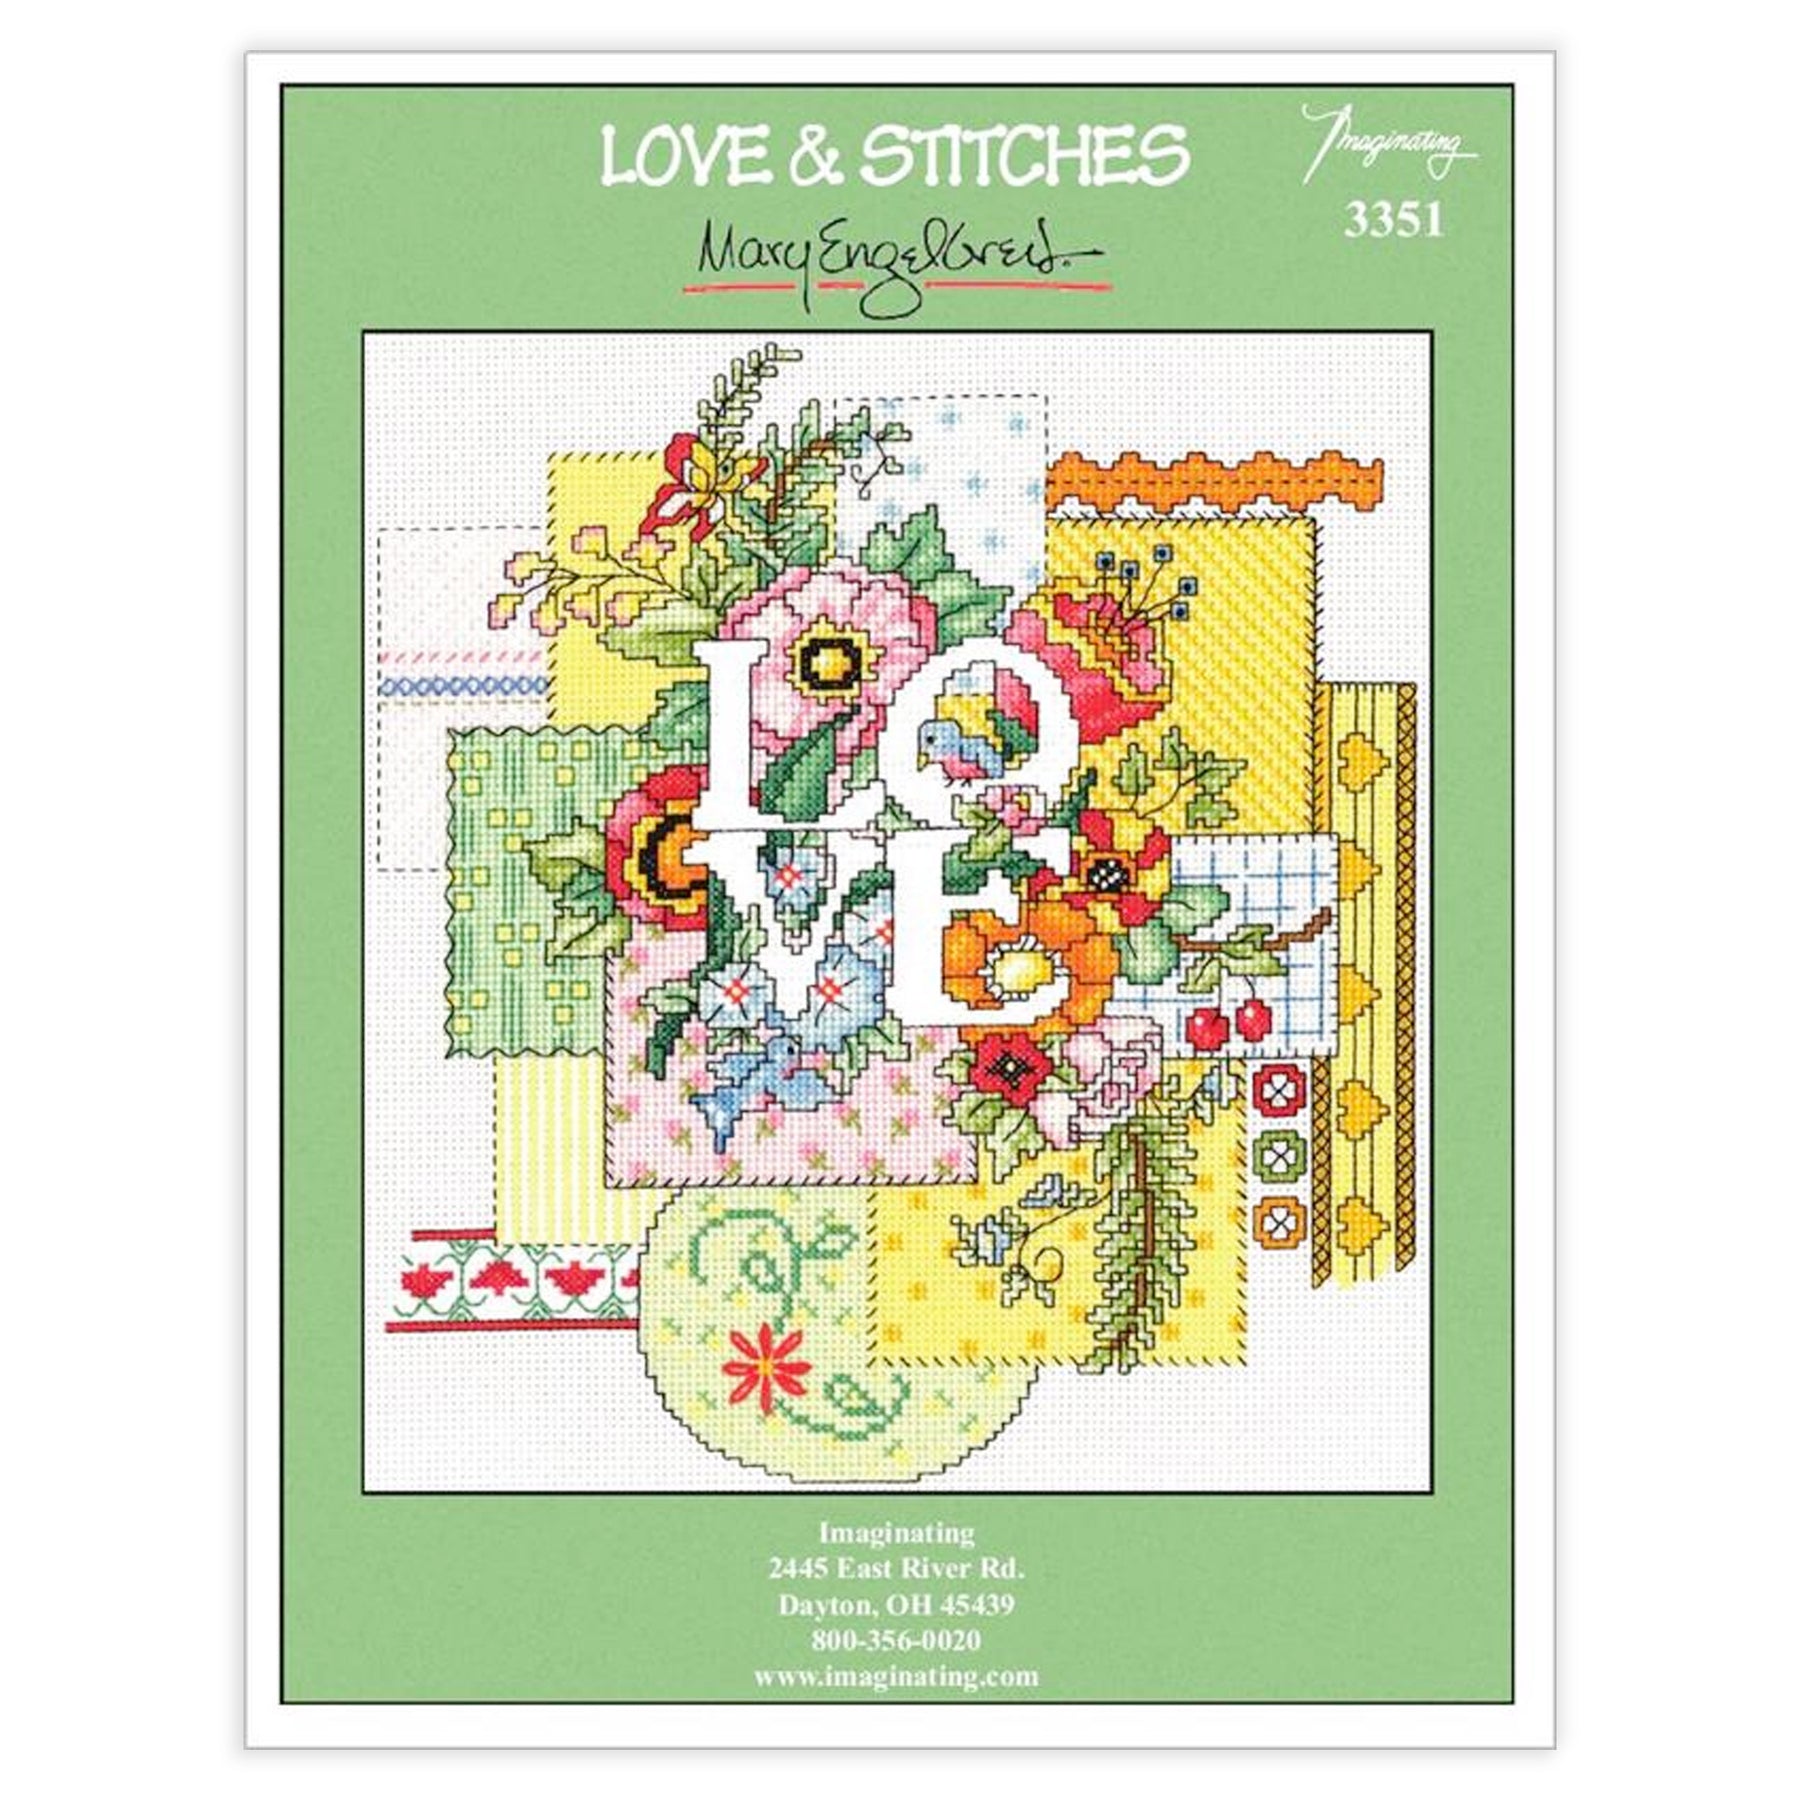 Love and Stitches Counted Cross Stitch Leaflet